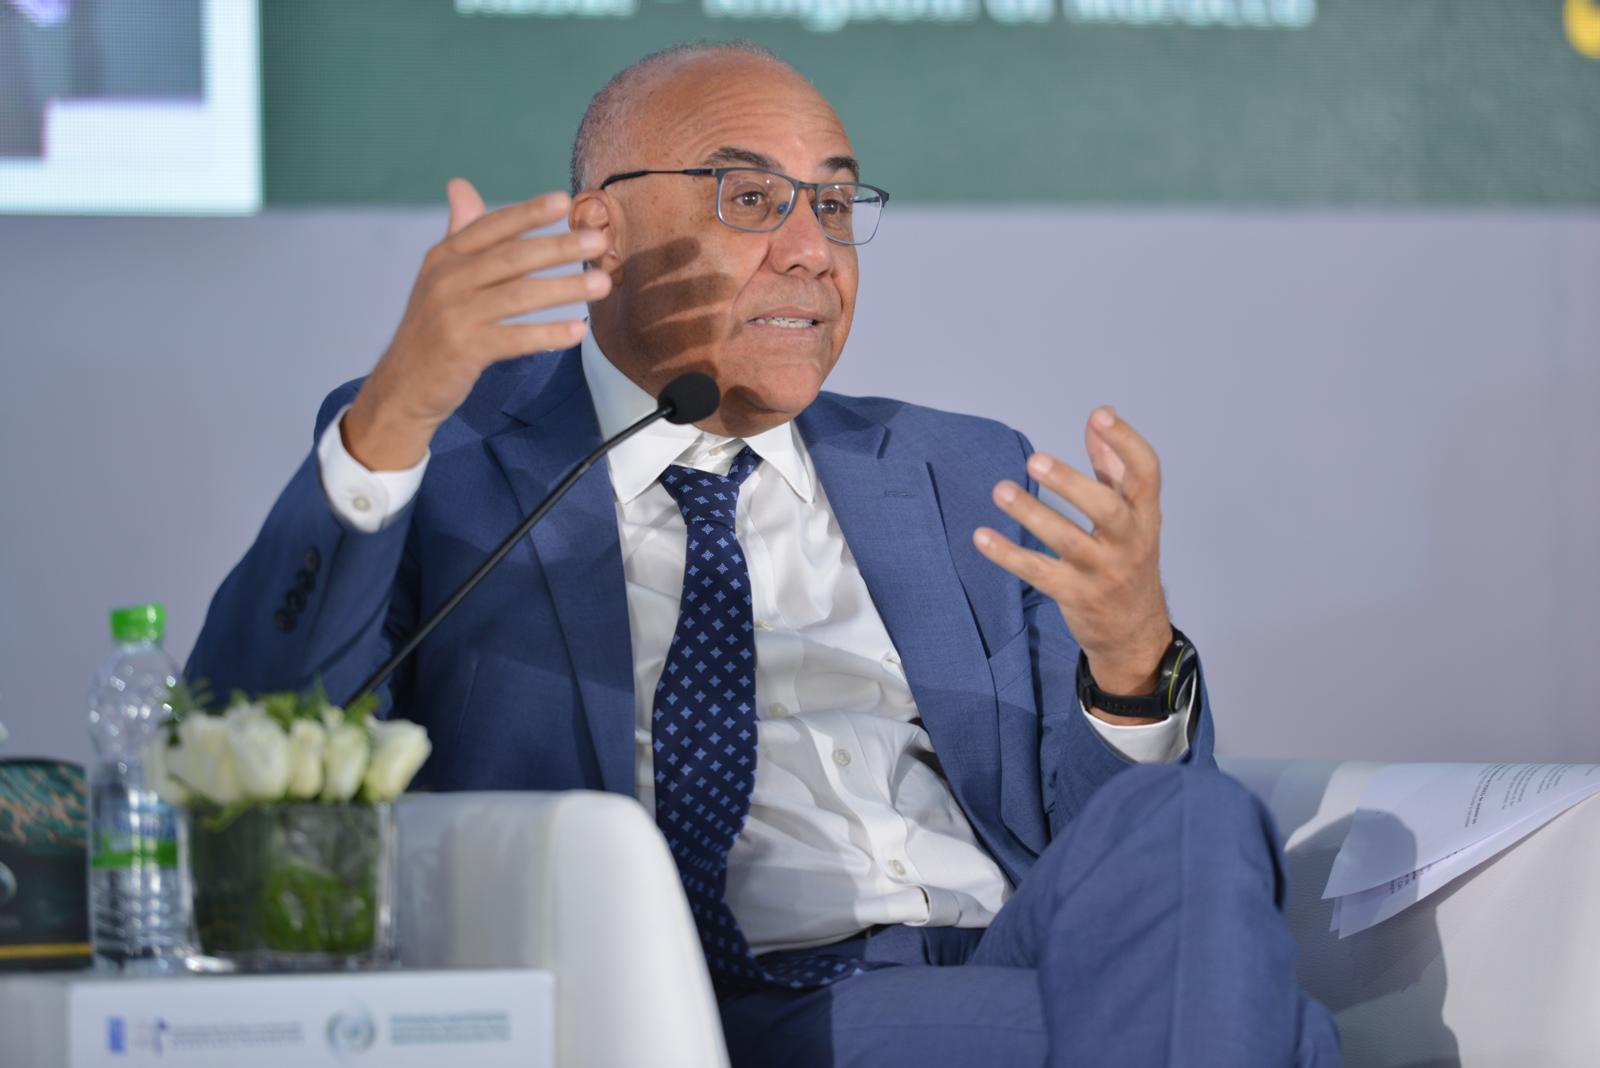 Al-Mirawi highlights Morocco's commitment to open science